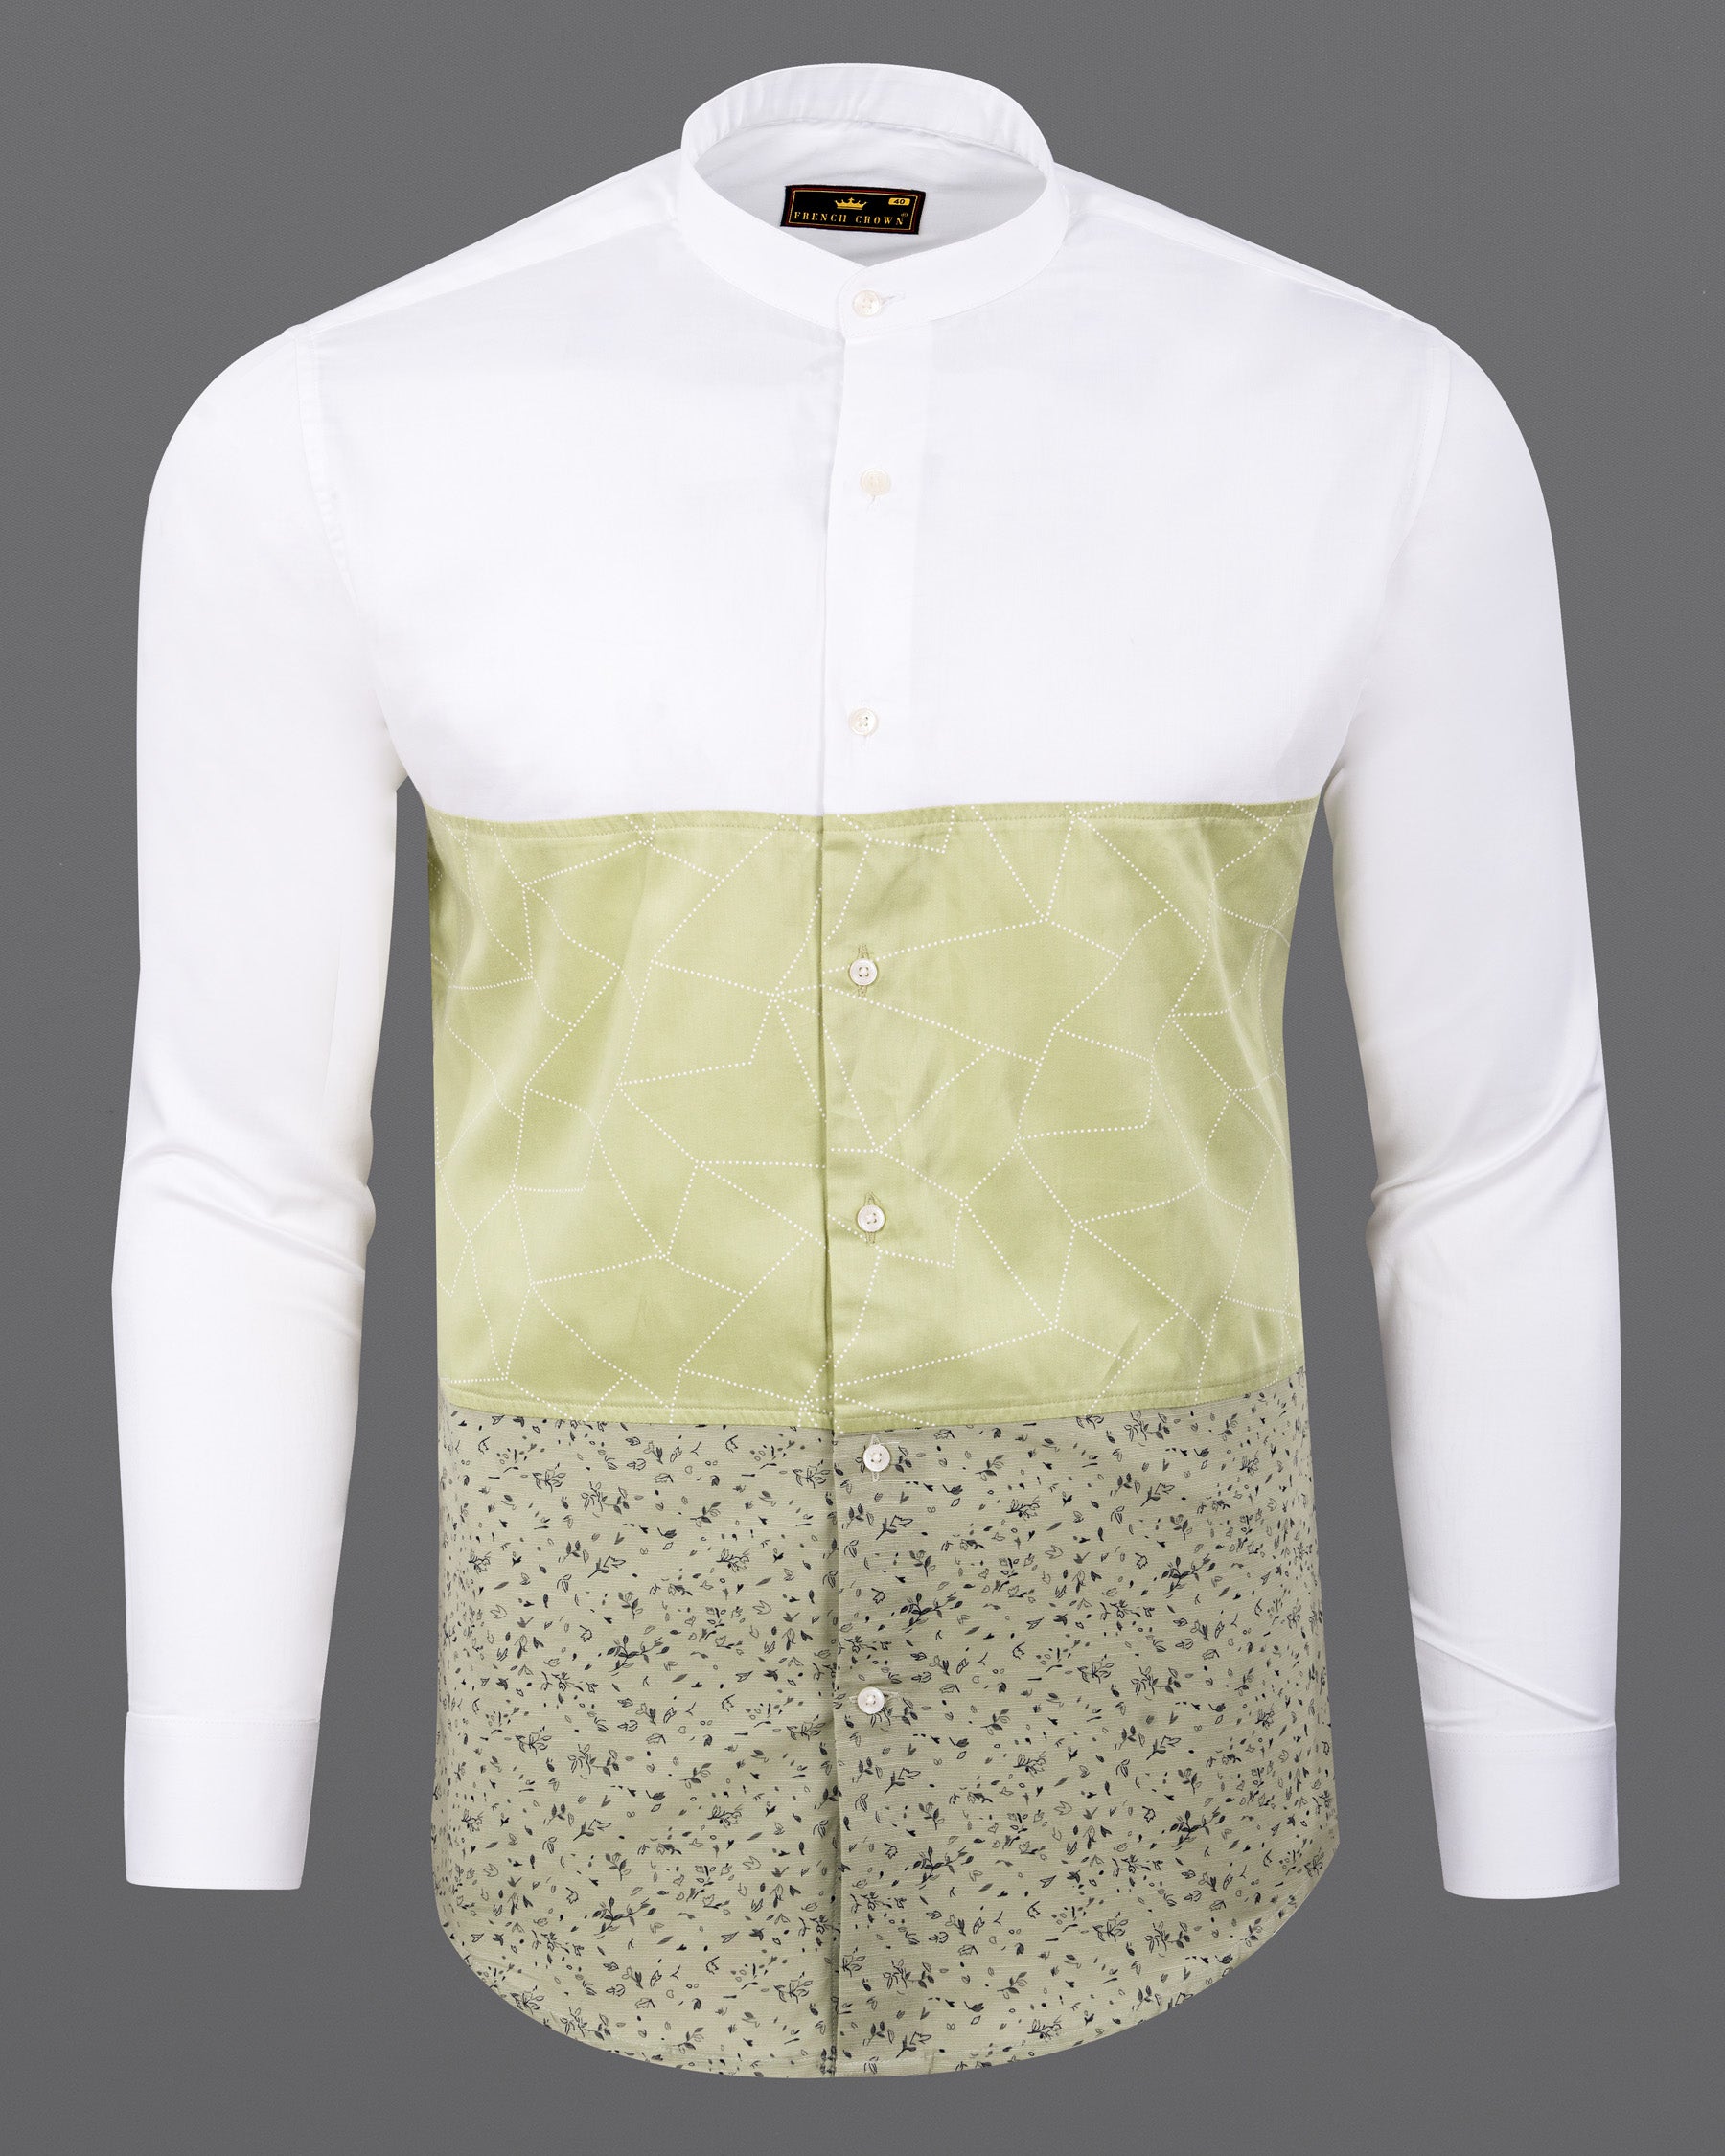 Bright White with Coriander and Nomad Printed Designer Shirt 5996-M-P91-38, 5996-M-P91-H-38, 5996-M-P91-39, 5996-M-P91-H-39, 5996-M-P91-40, 5996-M-P91-H-40, 5996-M-P91-42, 5996-M-P91-H-42, 5996-M-P91-44, 5996-M-P91-H-44, 5996-M-P91-46, 5996-M-P91-H-46, 5996-M-P91-48, 5996-M-P91-H-48, 5996-M-P91-50, 5996-M-P91-H-50, 5996-M-P91-52, 5996-M-P91-H-52